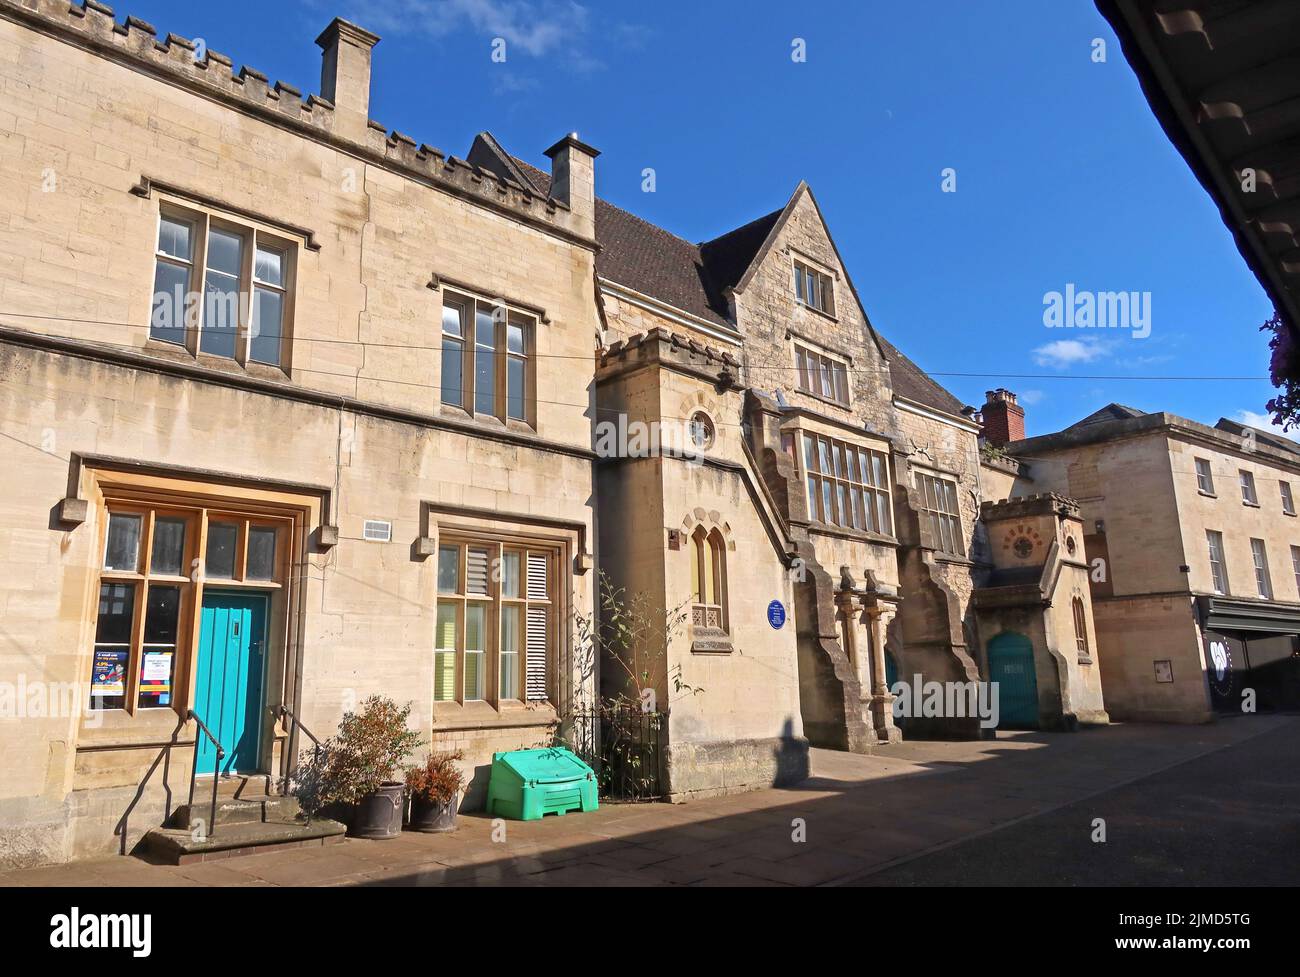 Old Town Hall, municipal building, The Shambles, Stroud, Gloucestershire, England, UK, GL5 1AP Stock Photo